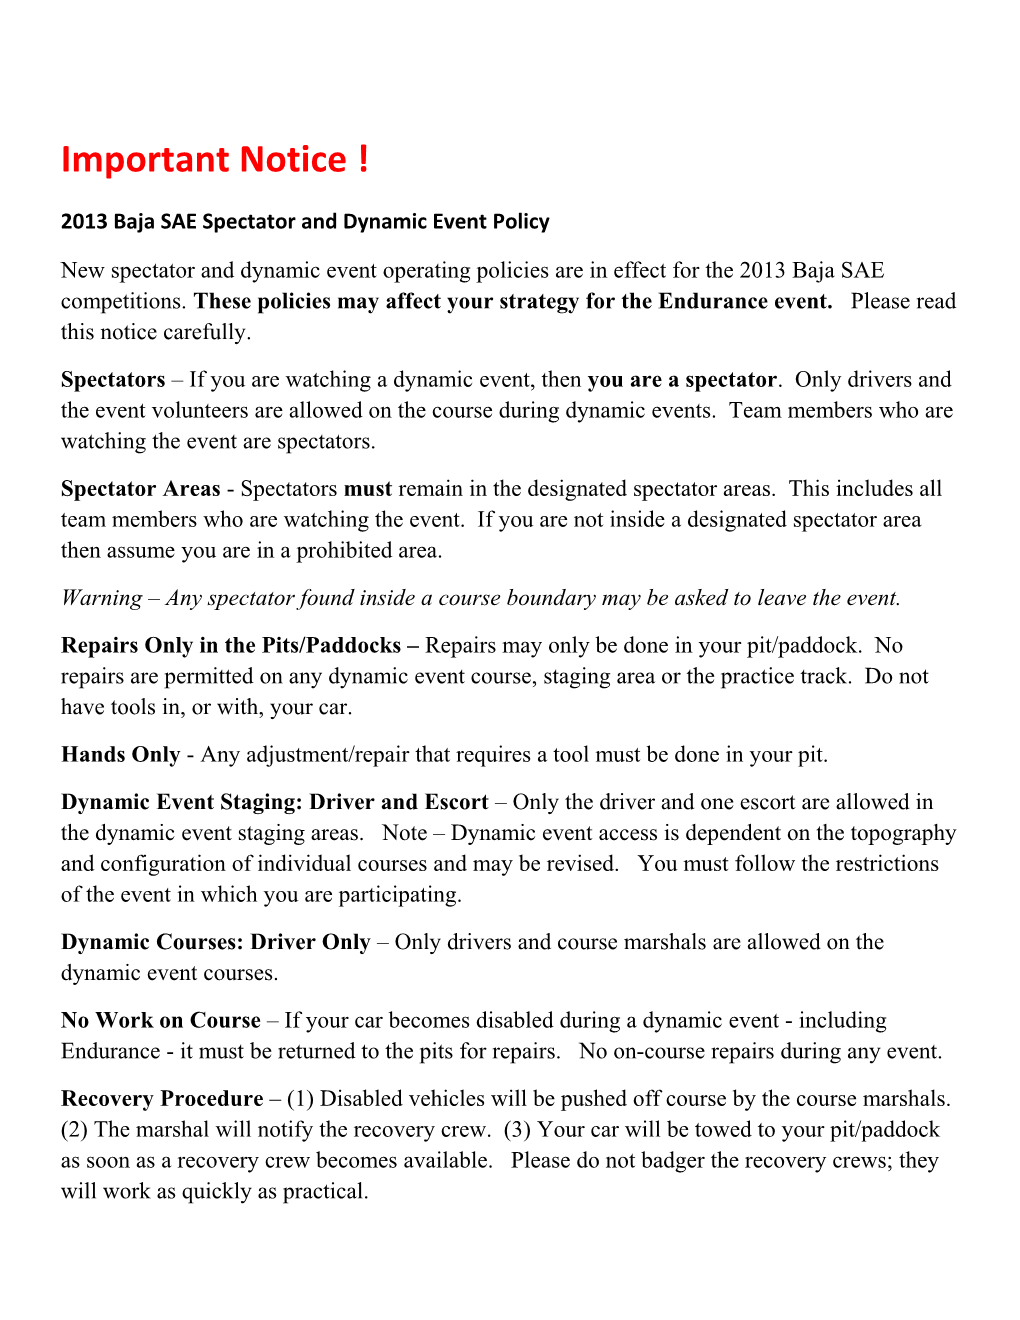 2013 Baja SAE Spectator and Dynamic Event Policy